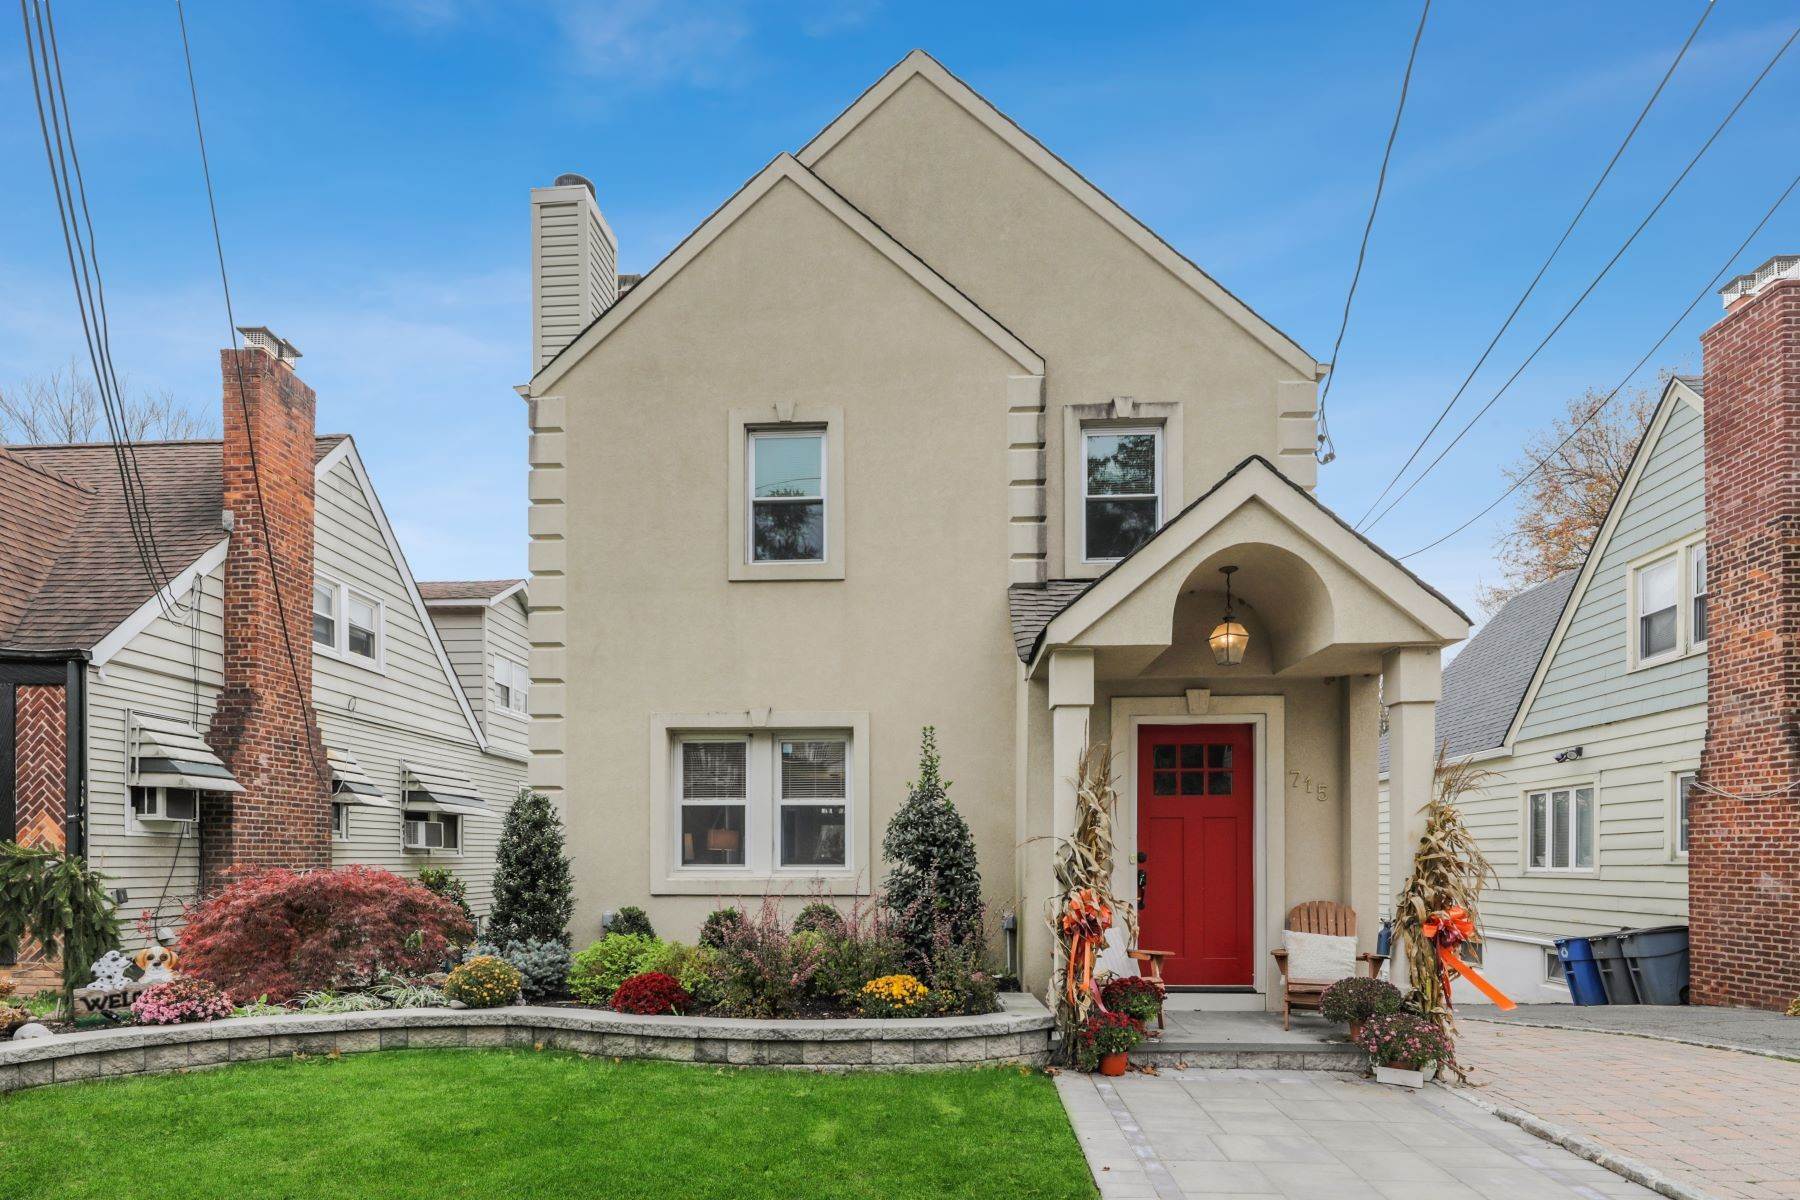 Single Family Homes for Sale at Beautifully Updated Brookdale Colonial 715 Broad Street Bloomfield, New Jersey 07003 United States